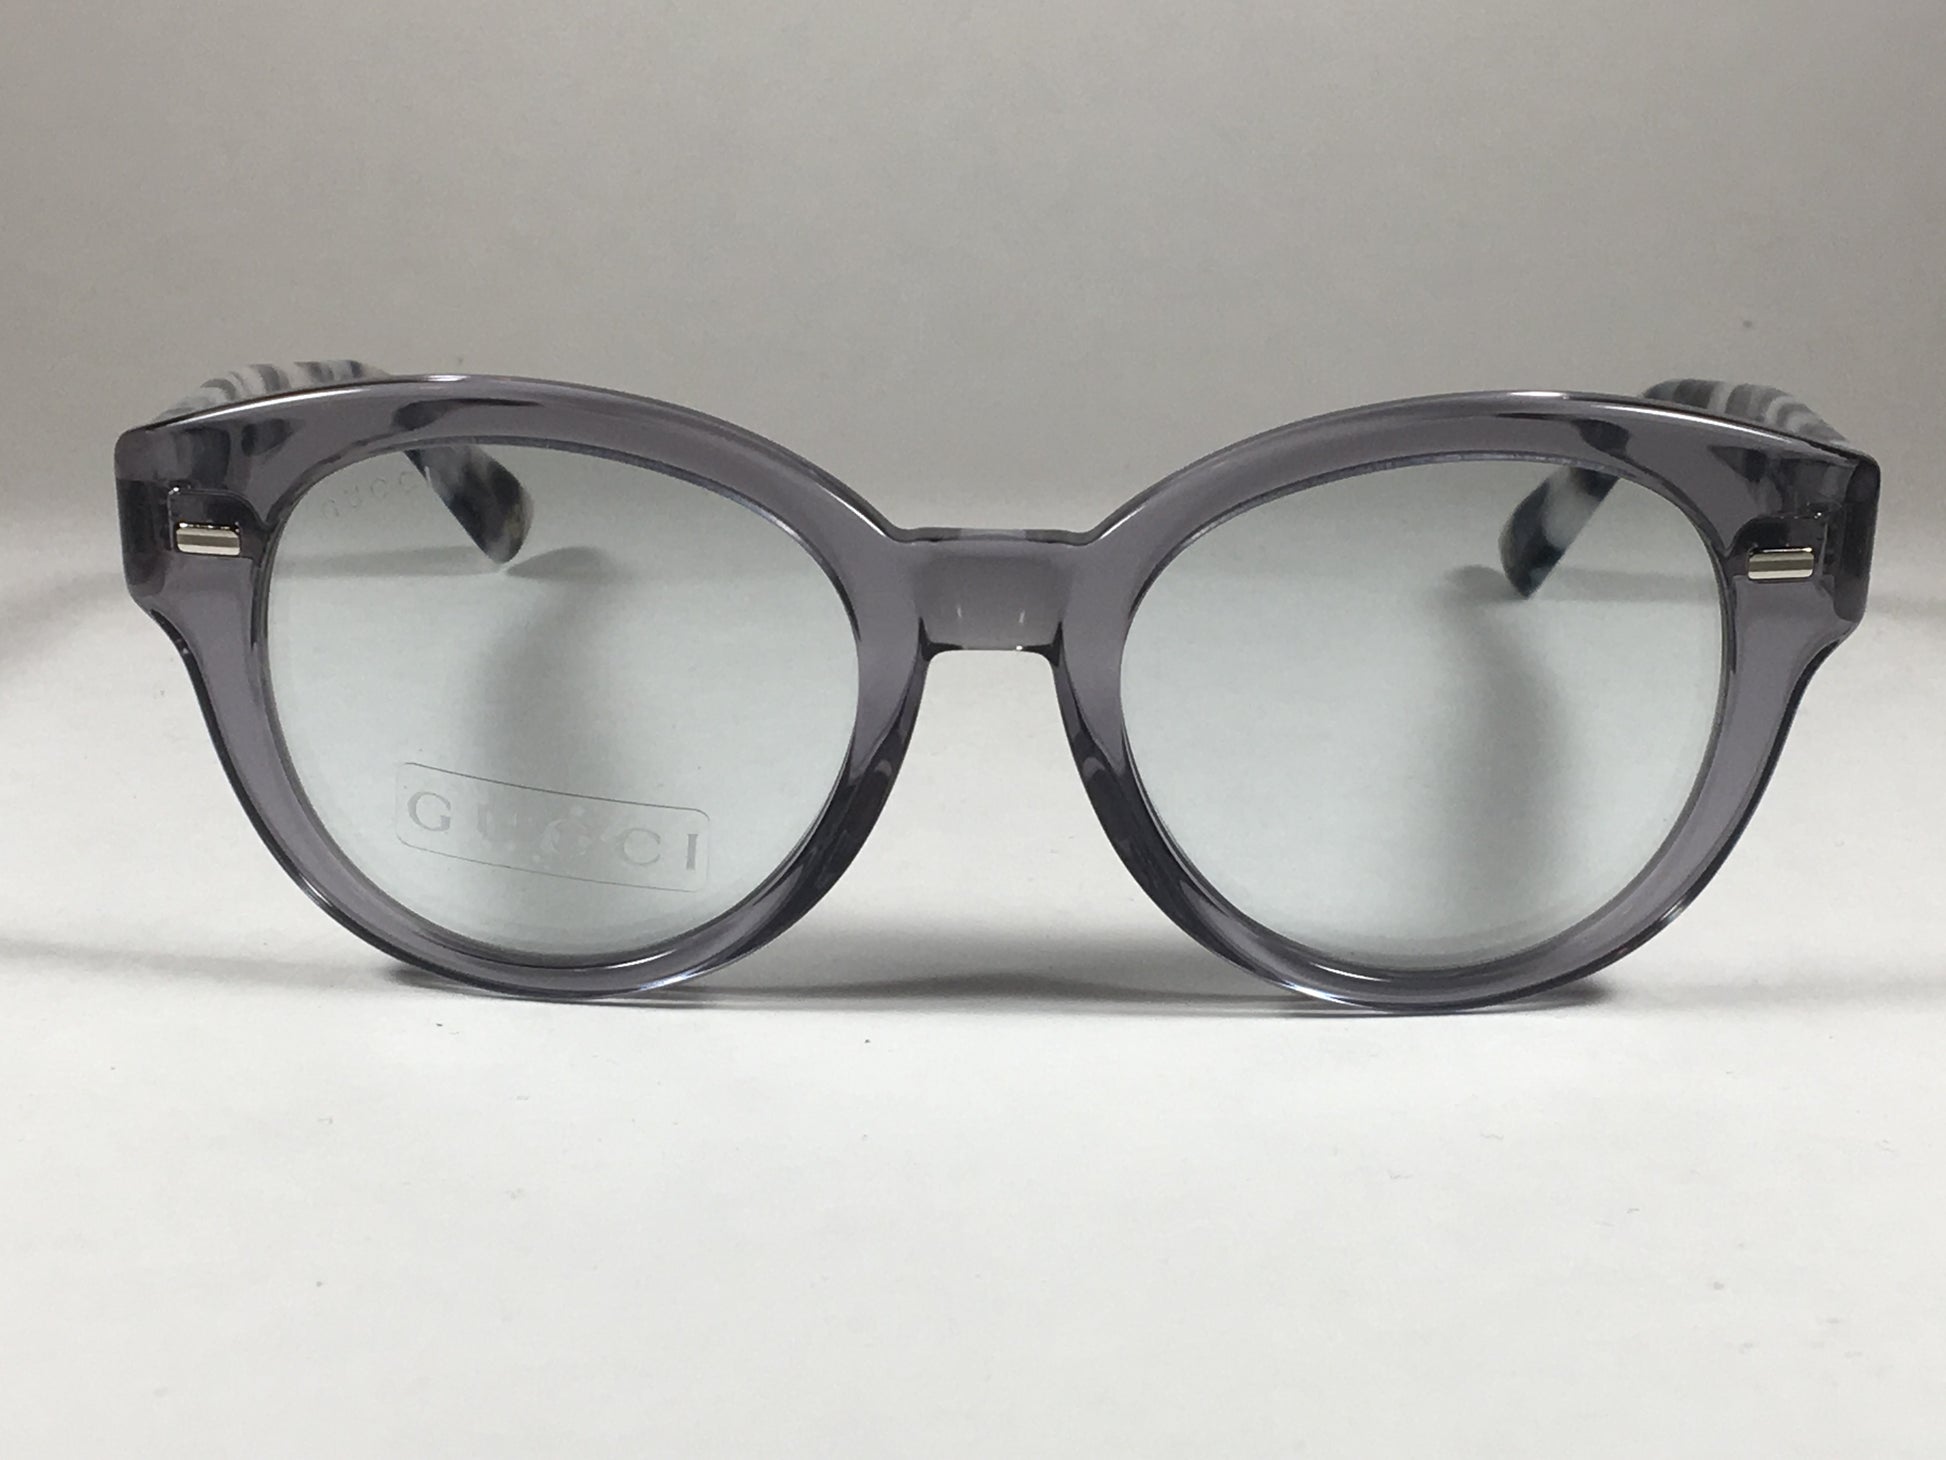 Gucci Sunglasses Rounded Clear Gray Lens Gray Havana Color Marble Frame Gg3745/s Kna97 - Sunglasses